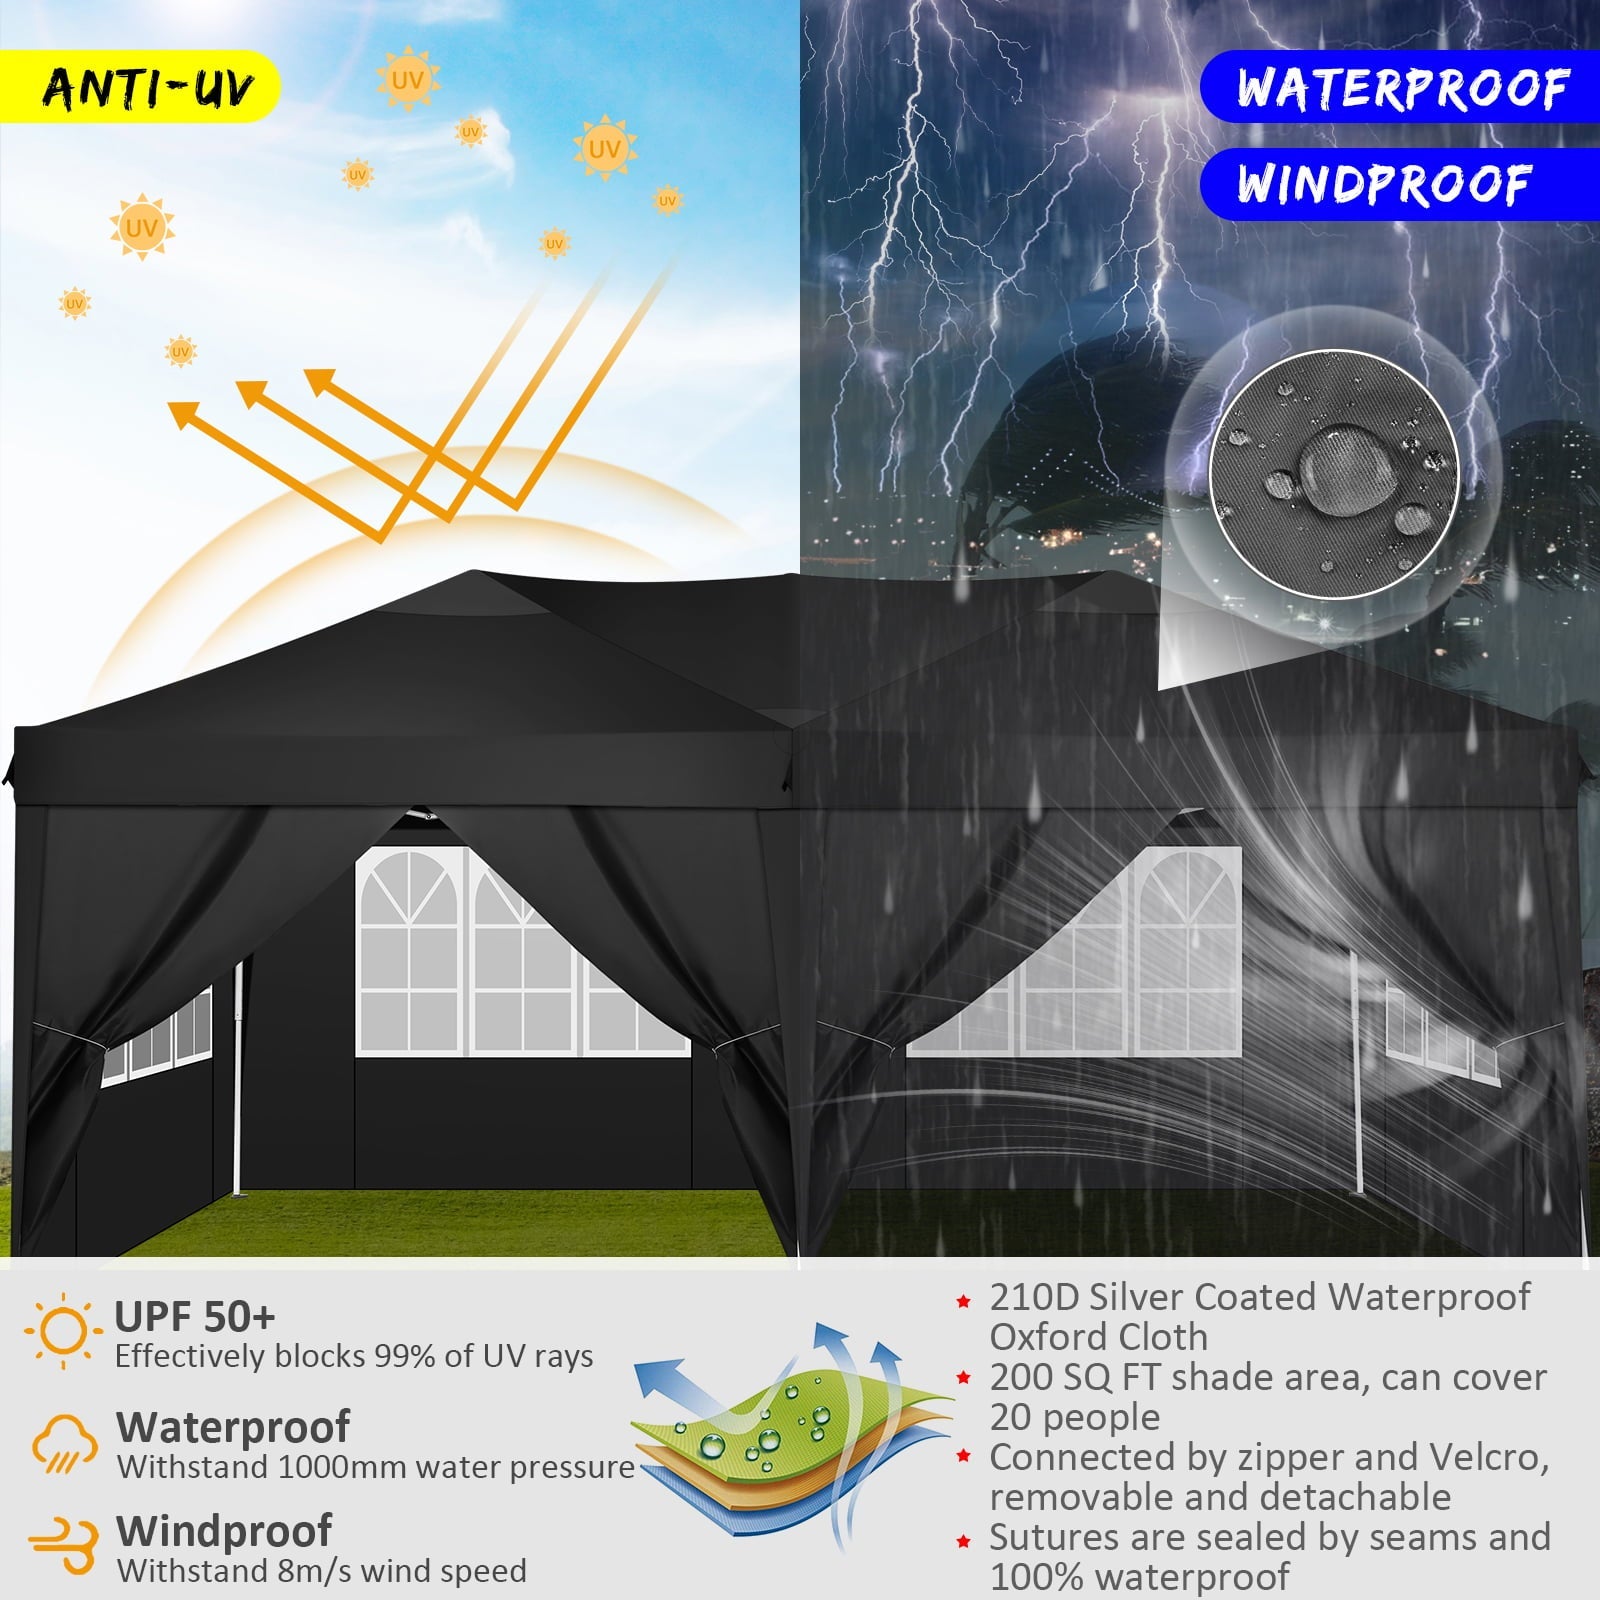 10' x 20' Outdoor Canopy Tent EZ Pop Up Backyard Canopy Portable Party Commercial Instant Canopy Shelter Tent Gazebo with 6 Removable Sidewalls & Carrying Bag for Wedding Picnics Camping, Black